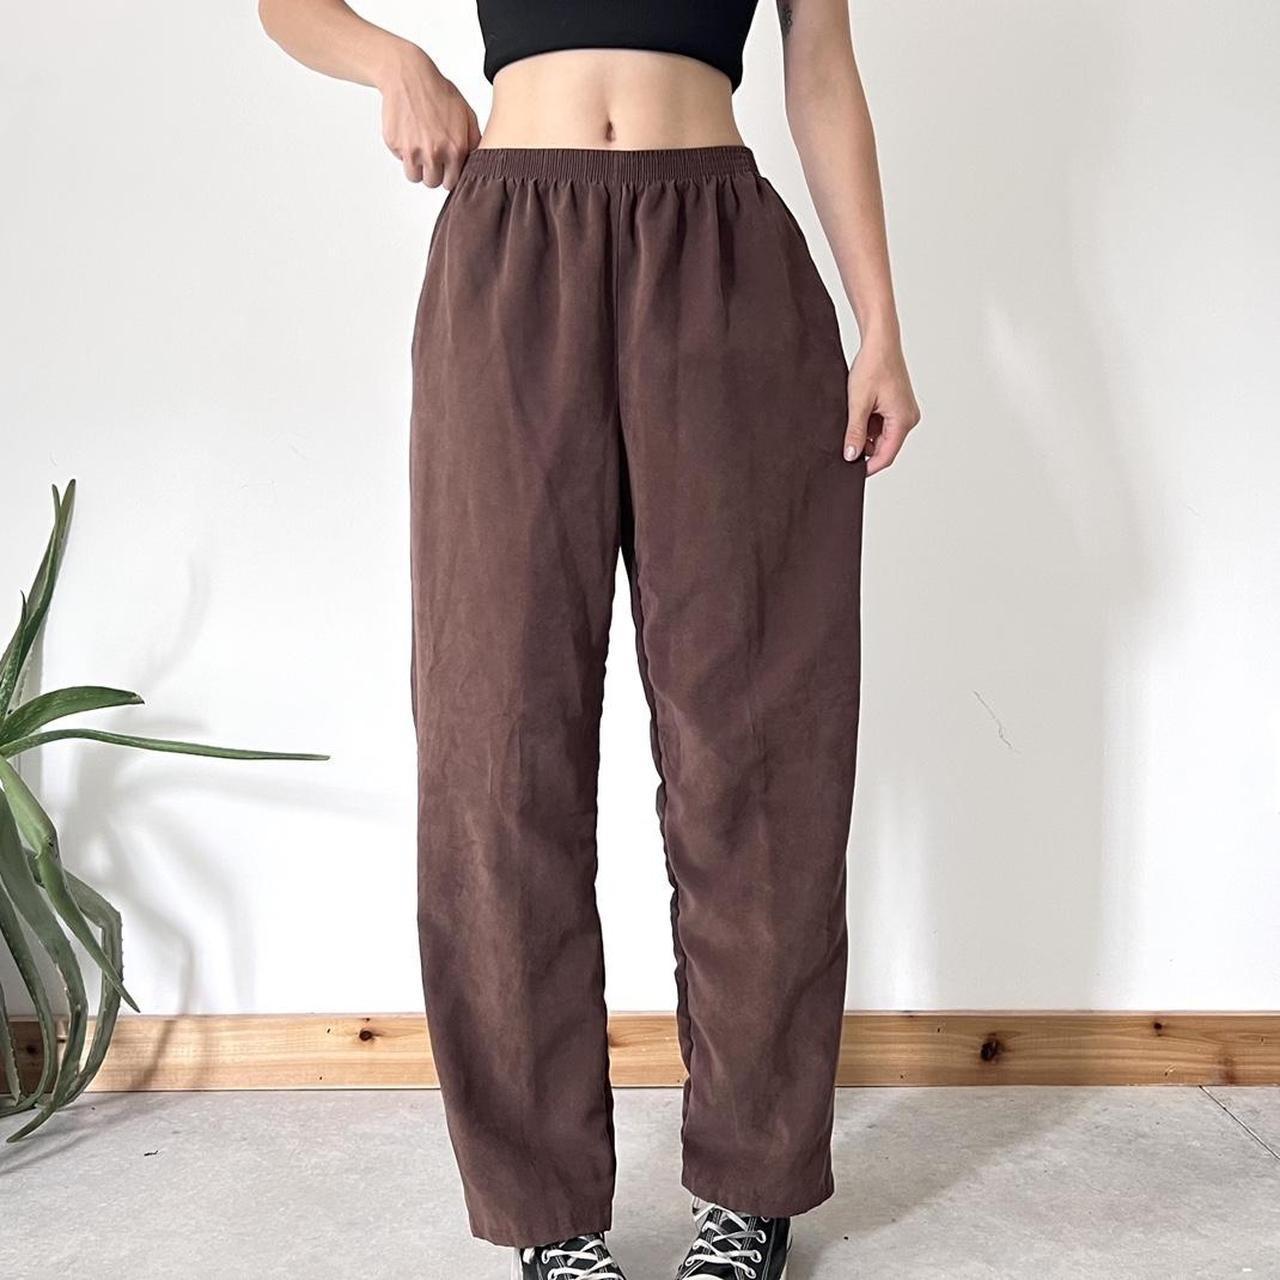 Vintage 90s Brown Pants They’re a soft faux suede... - Depop